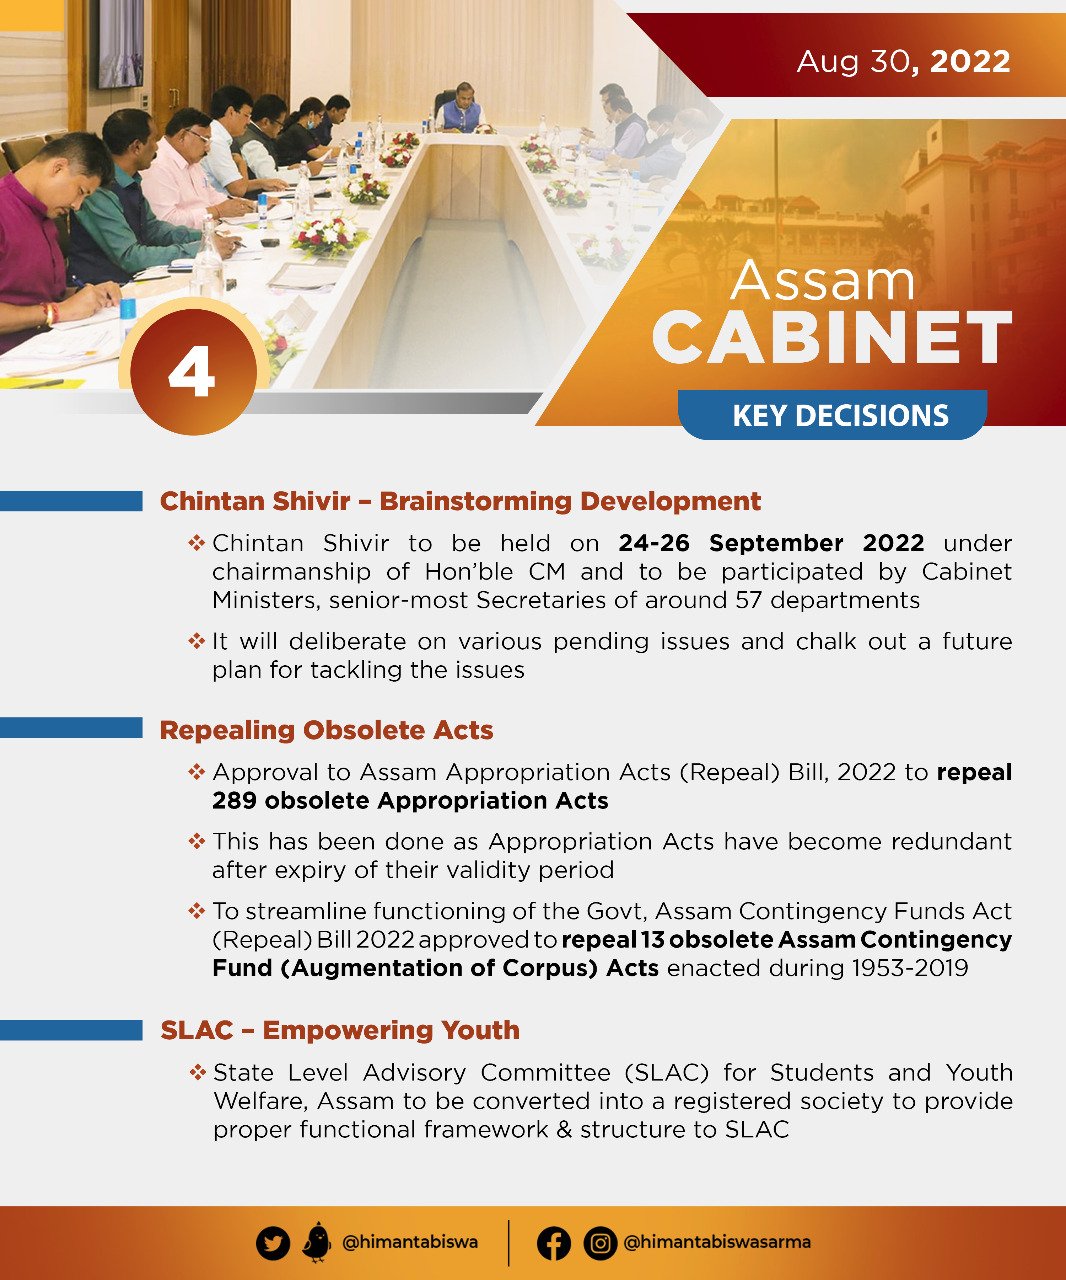 Cabinet Decisions taken on 30 August, 2022 (4)